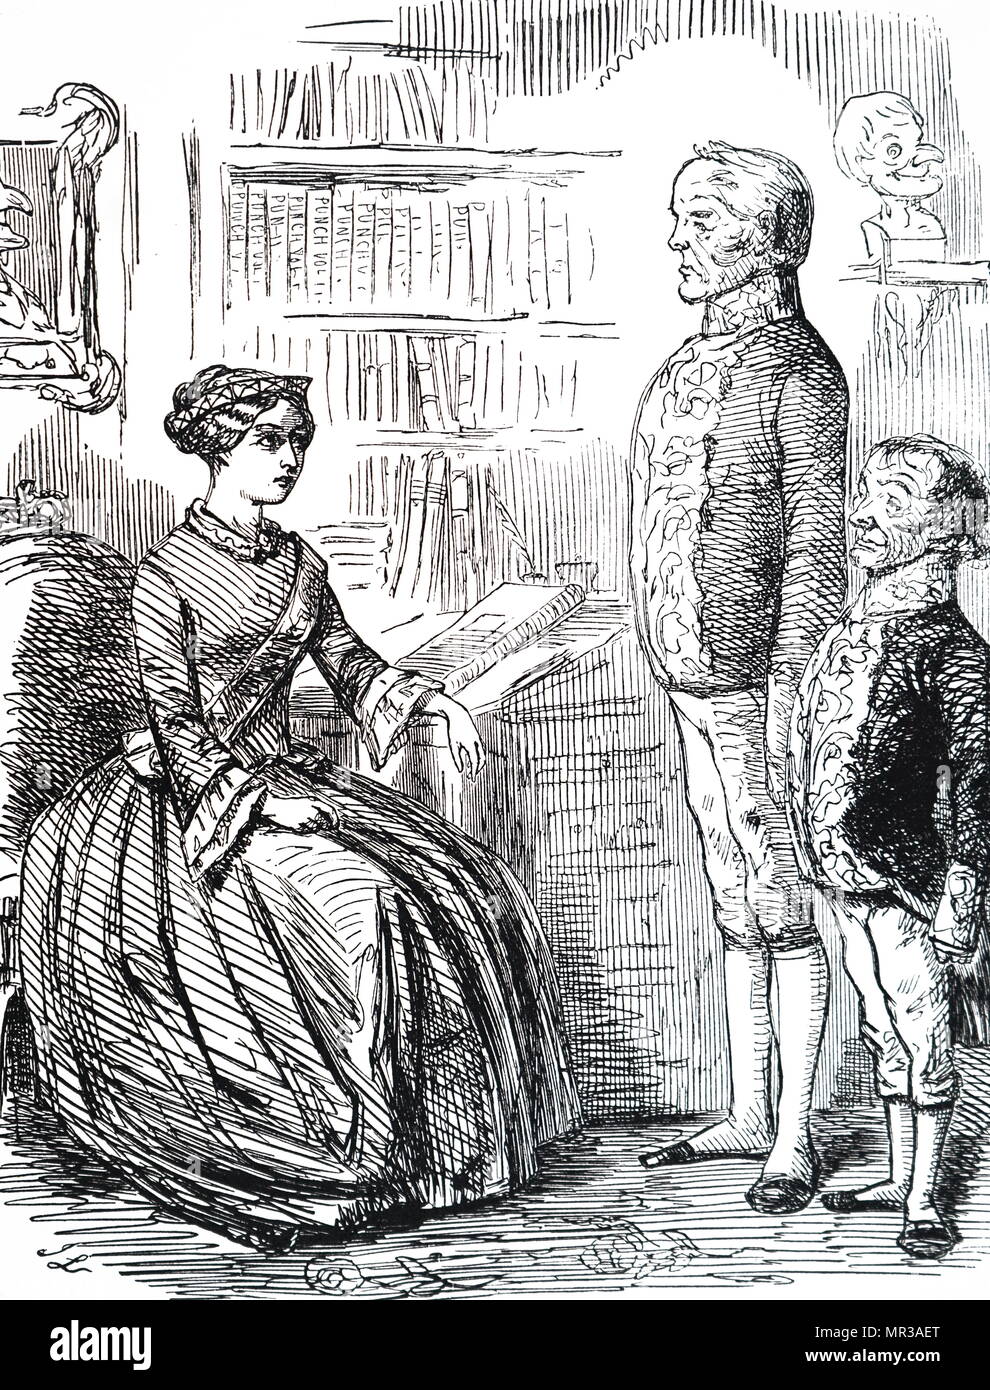 Cartoon depicting Henry John Temple, 3rd Viscount Palmerston handing Queen Victoria his resignation. Palmerston was forced to resign on the grounds that he had exceeded is authority. Lord John Russell (right) stayed in office as Prime Minister. Henry John Temple, 3rd Viscount Palmerston (1784-1865) a British statesman and former Prime Minister of the United Kingdom. John Russell, 1st Earl Russell (1792-1878) leading Whig and Liberal politician and former Prime Minister of the United Kingdom.  Illustrated by John Leech (1817-1864) an English caricaturist and illustrator. Dated 19th century Stock Photo